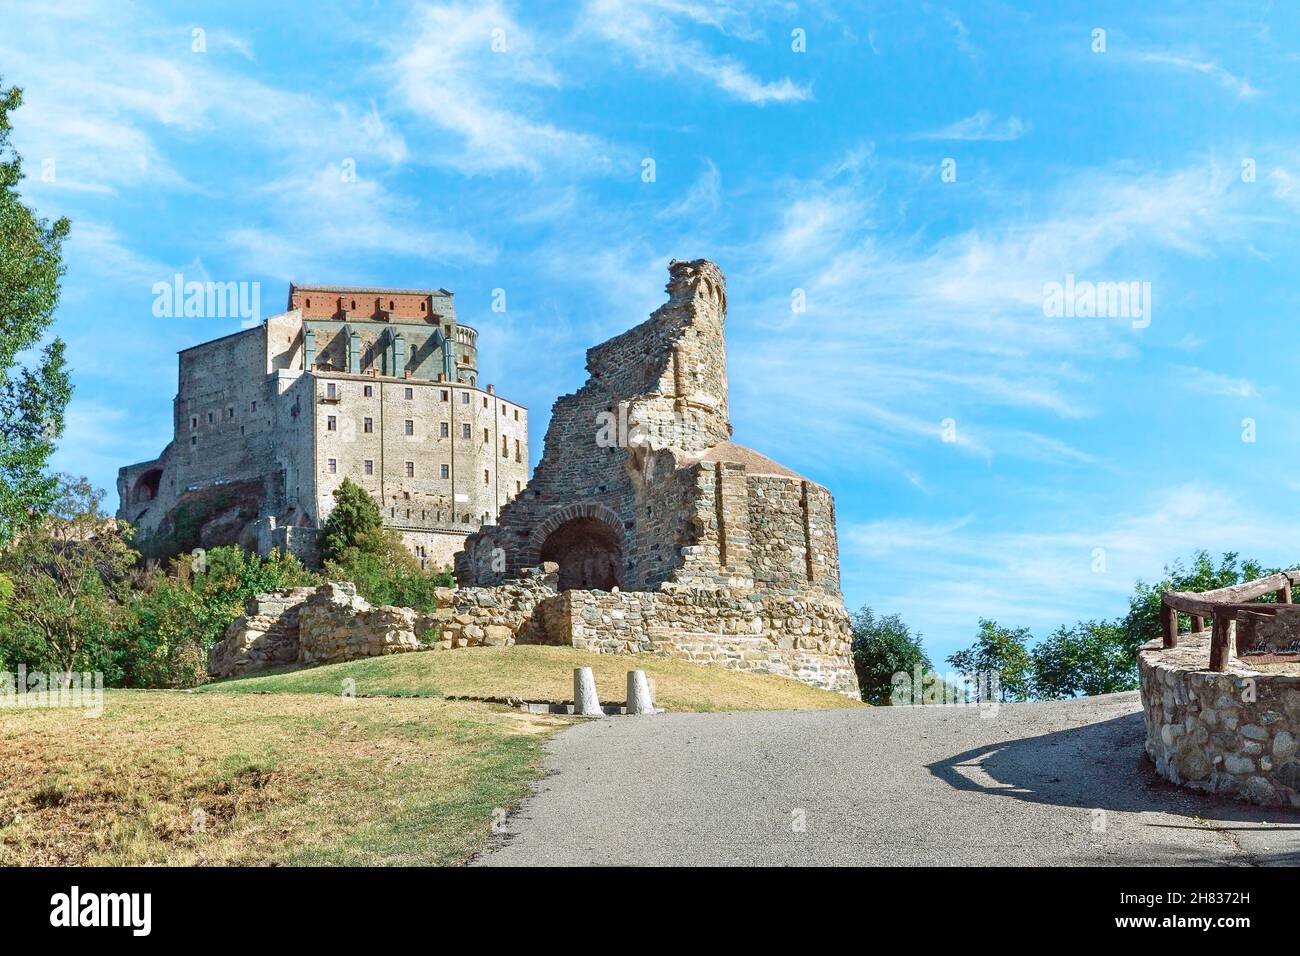 Sacra di San Michele, Saint Michael's Abbey, is a religious complex near Turin in Susa Valley, Italy Stock Photo